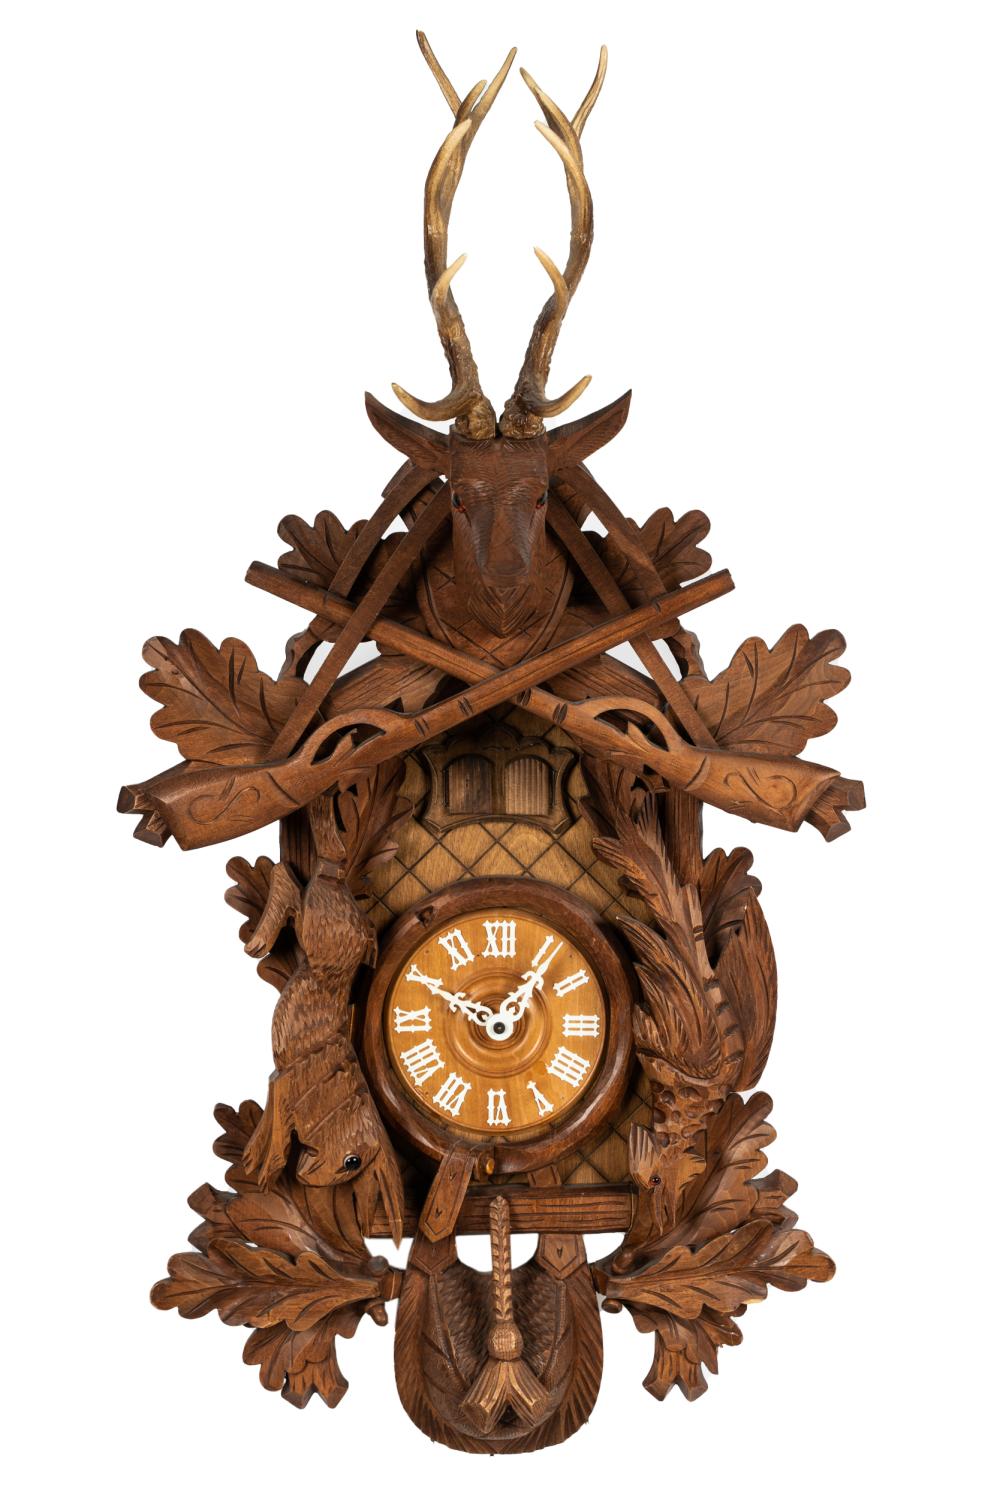 BLACK FOREST STYLE CUCKOO CLOCKwith 33326b